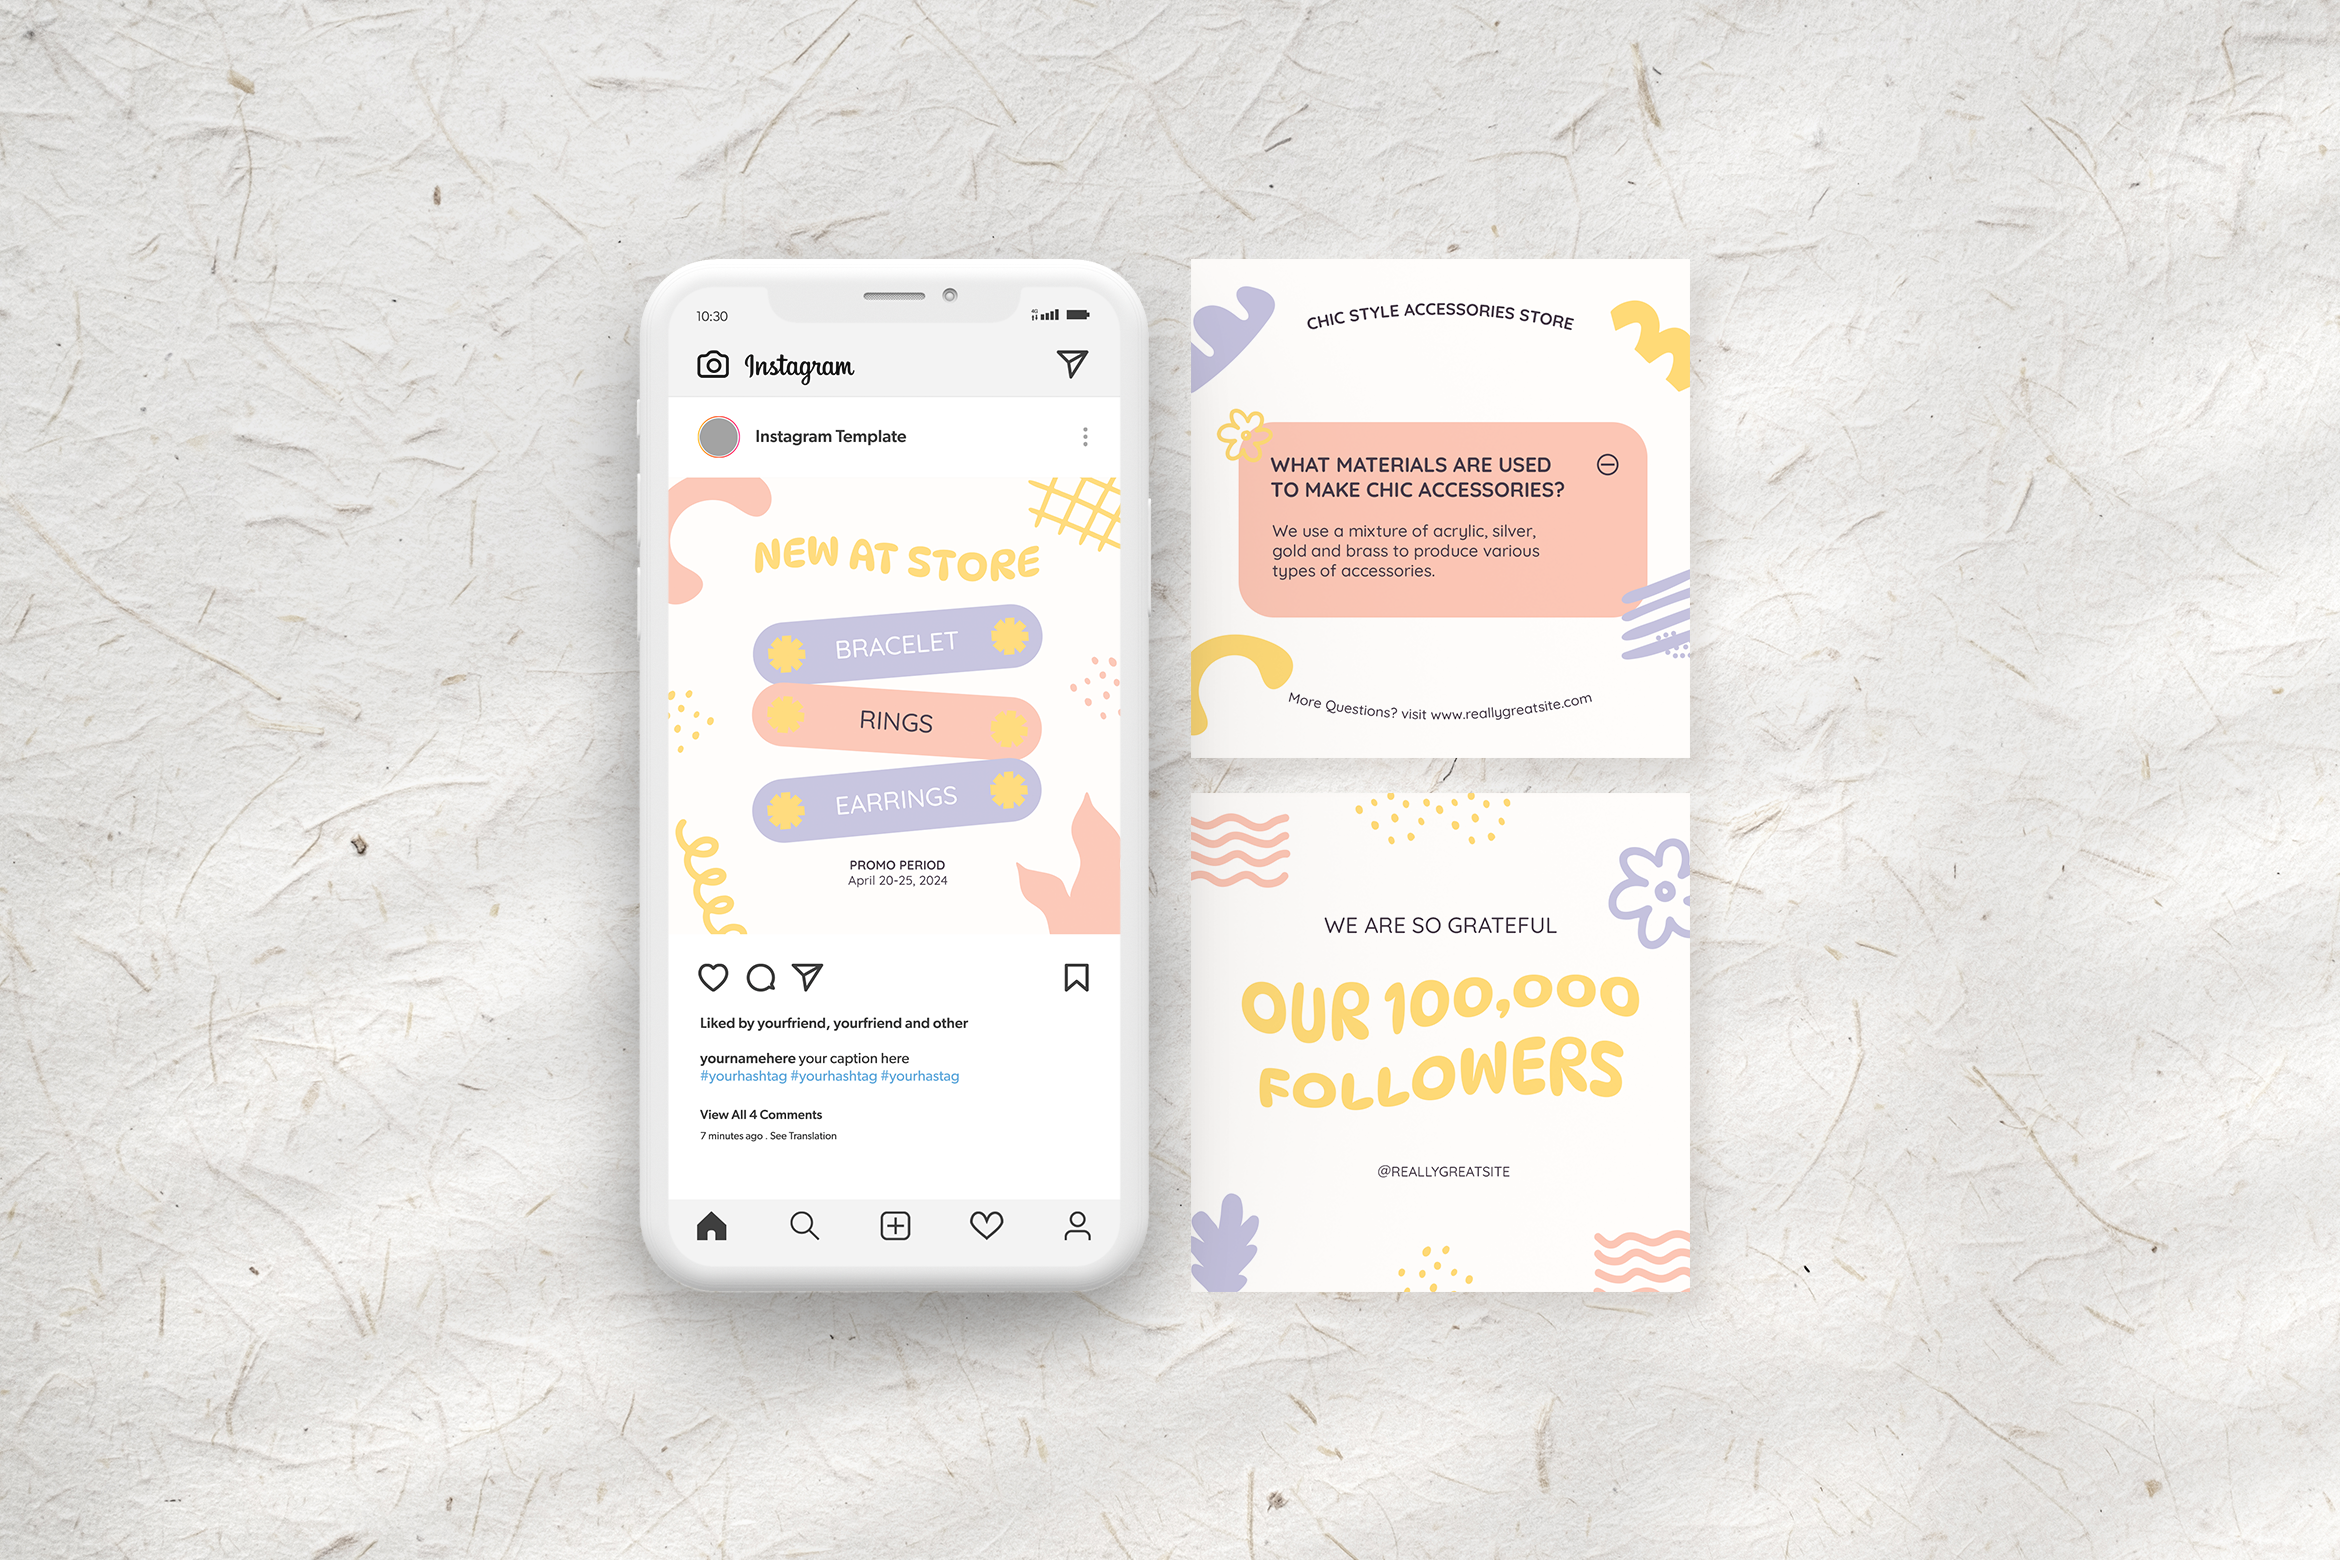 https://peterdraw.studio/wp-content/uploads/2023/04/Pastel-Cute-Organic-Social-Media-Kit-Instagram-Post-with-Salmon-Yellow-Lilac-and-White-colors-2.png